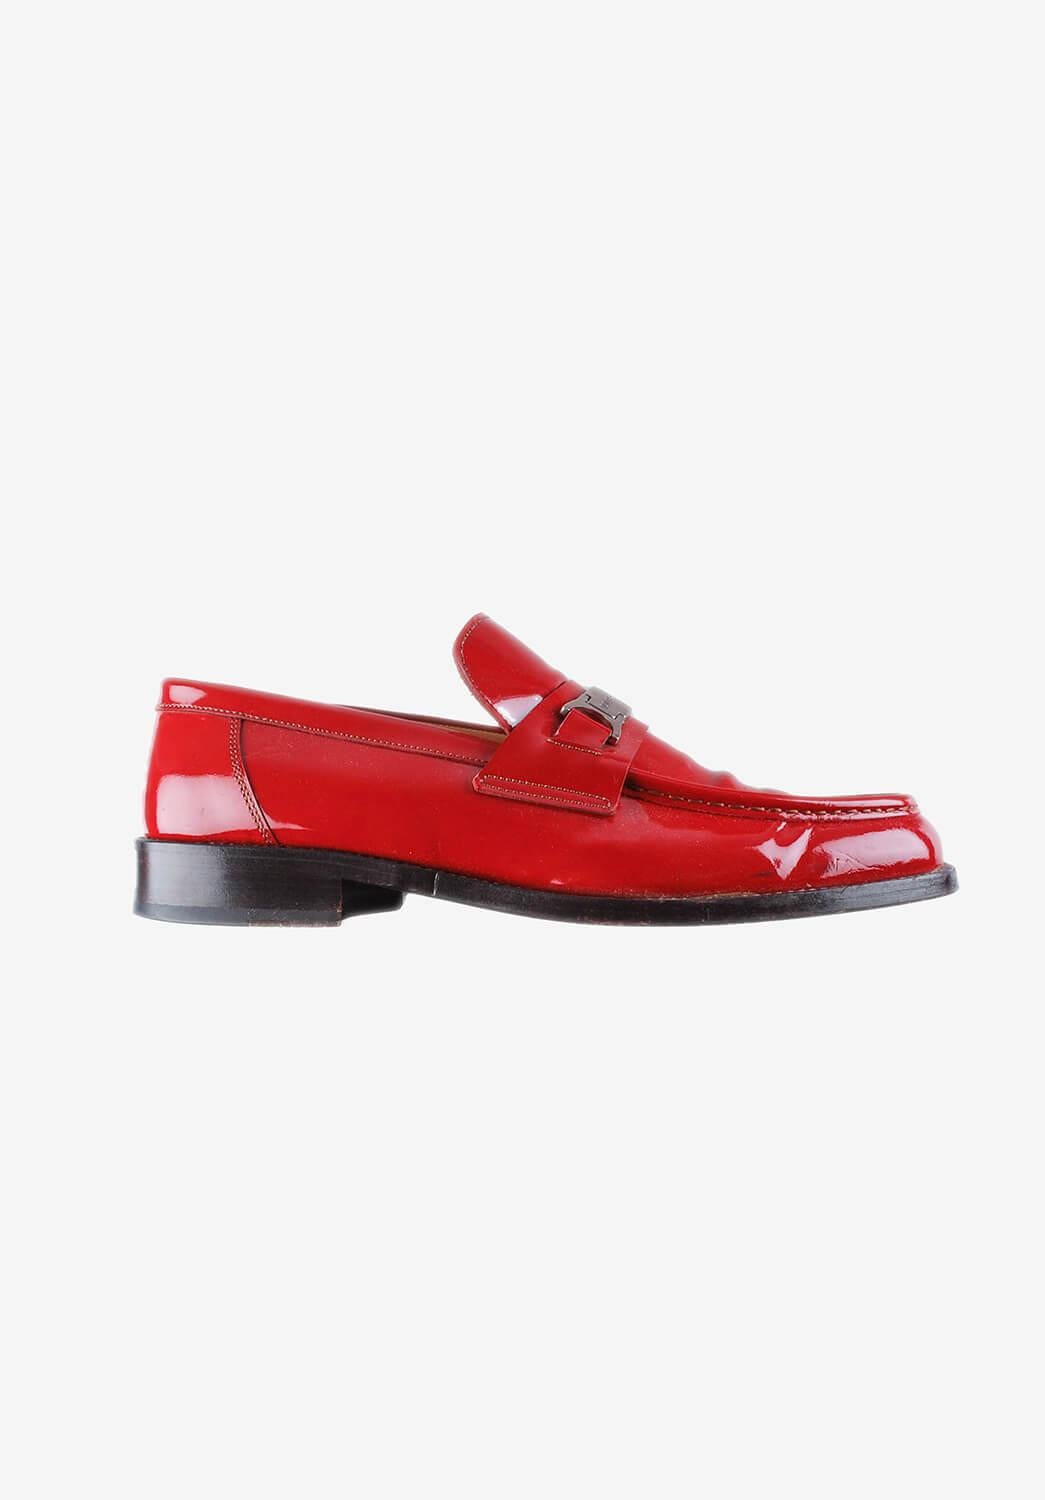 Vintage Dolce&Gabbana Red Flats Patent Leather Men Shoes Size 8, EUR43 In Good Condition For Sale In Kaunas, LT